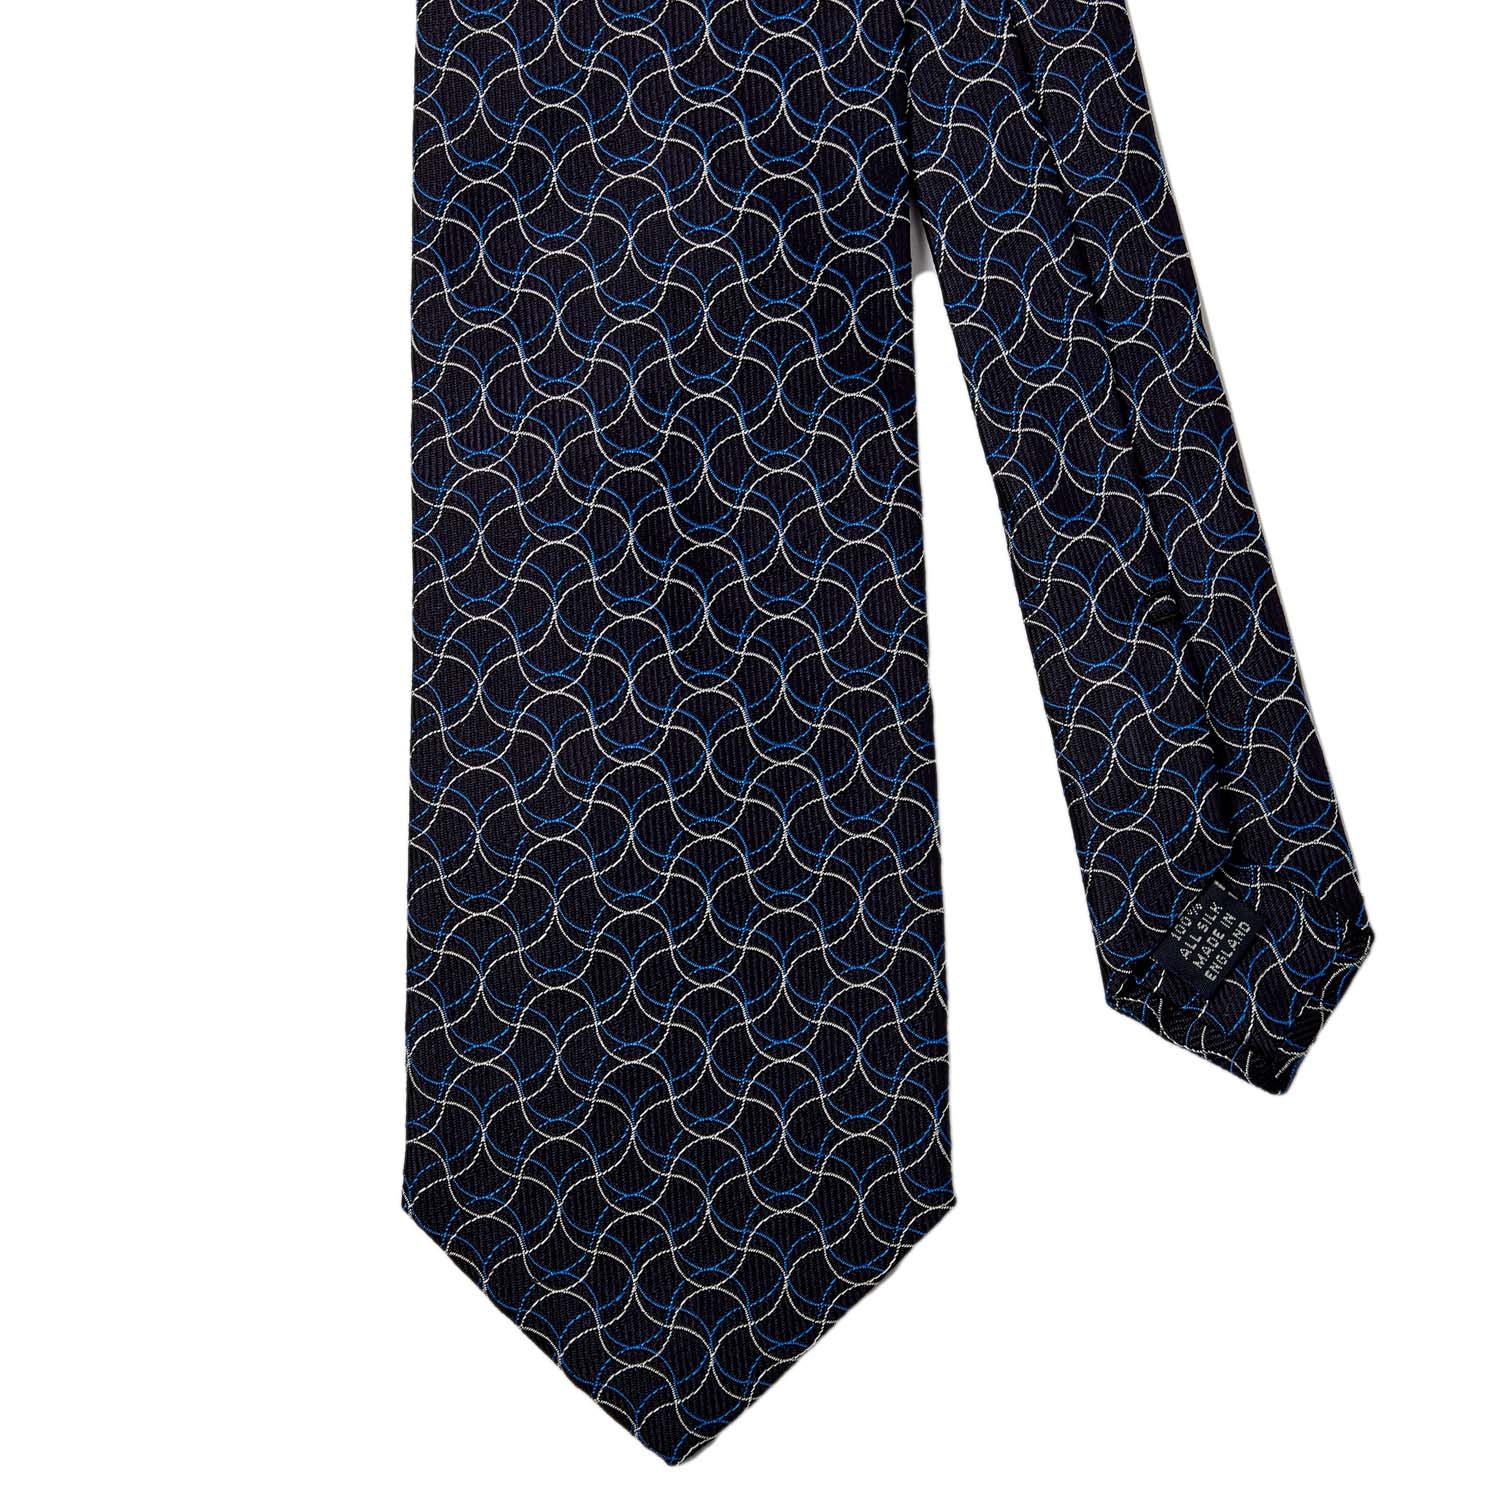 A KirbyAllison.com handmade Sovereign Grade Navy Swirl Jacquard Tie with a geometric pattern on it, from the United Kingdom.